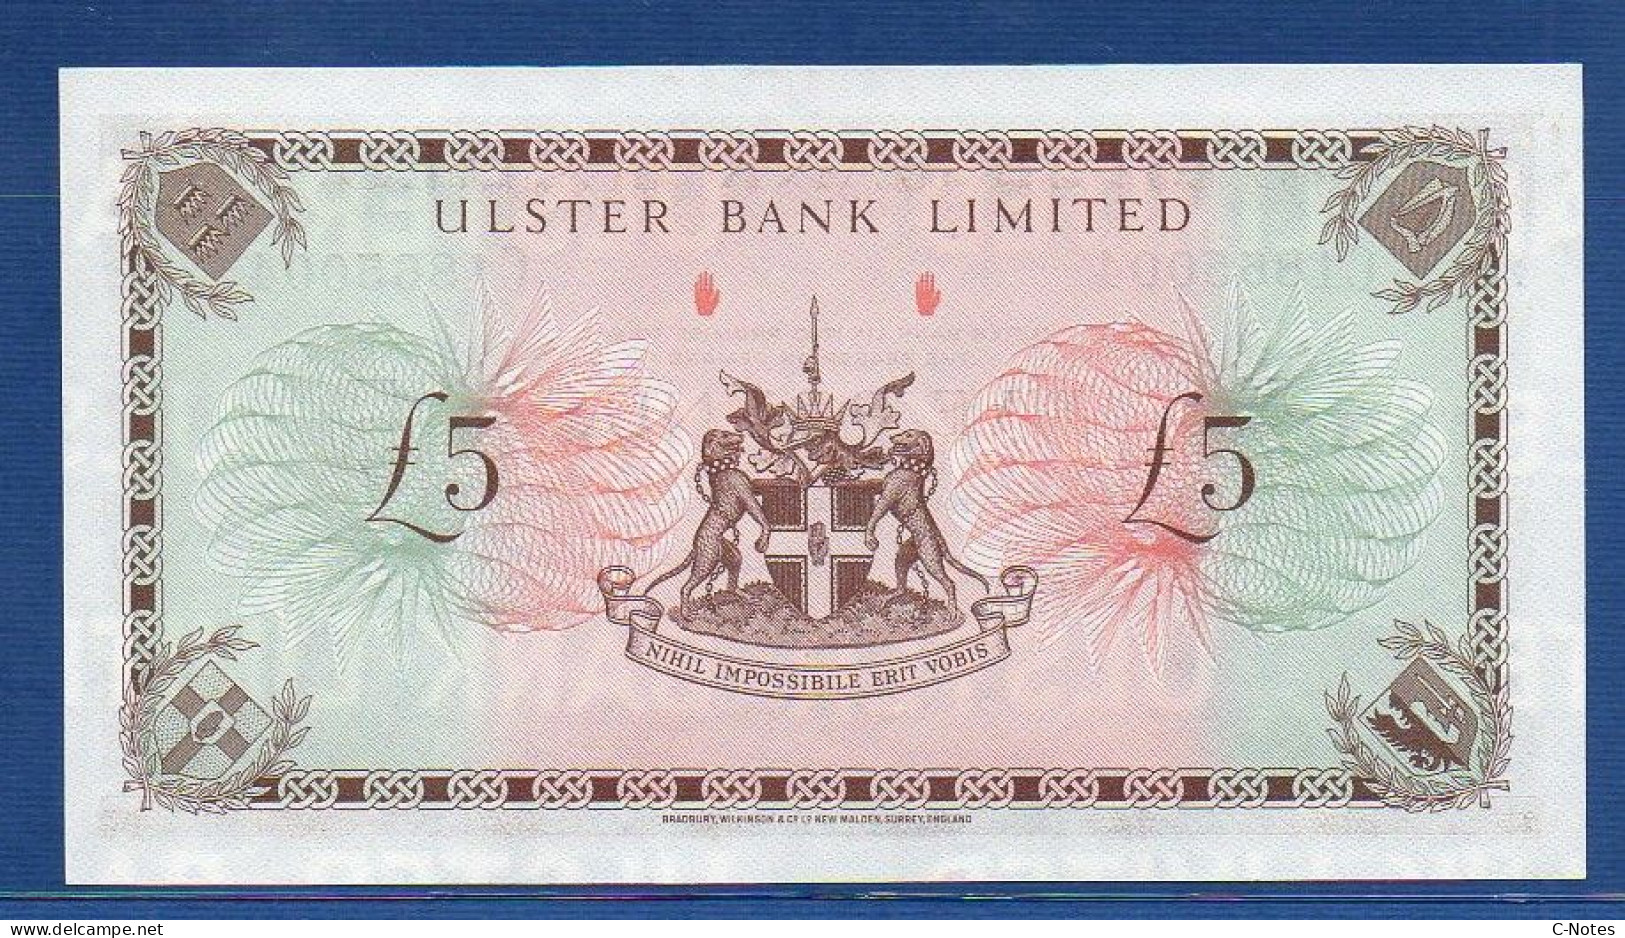 NORTHERN IRELAND - P.326c – 5 POUNDS 01.02.1988 UNC, S/n C1865004 Ulster Bank Limited - 5 Pounds